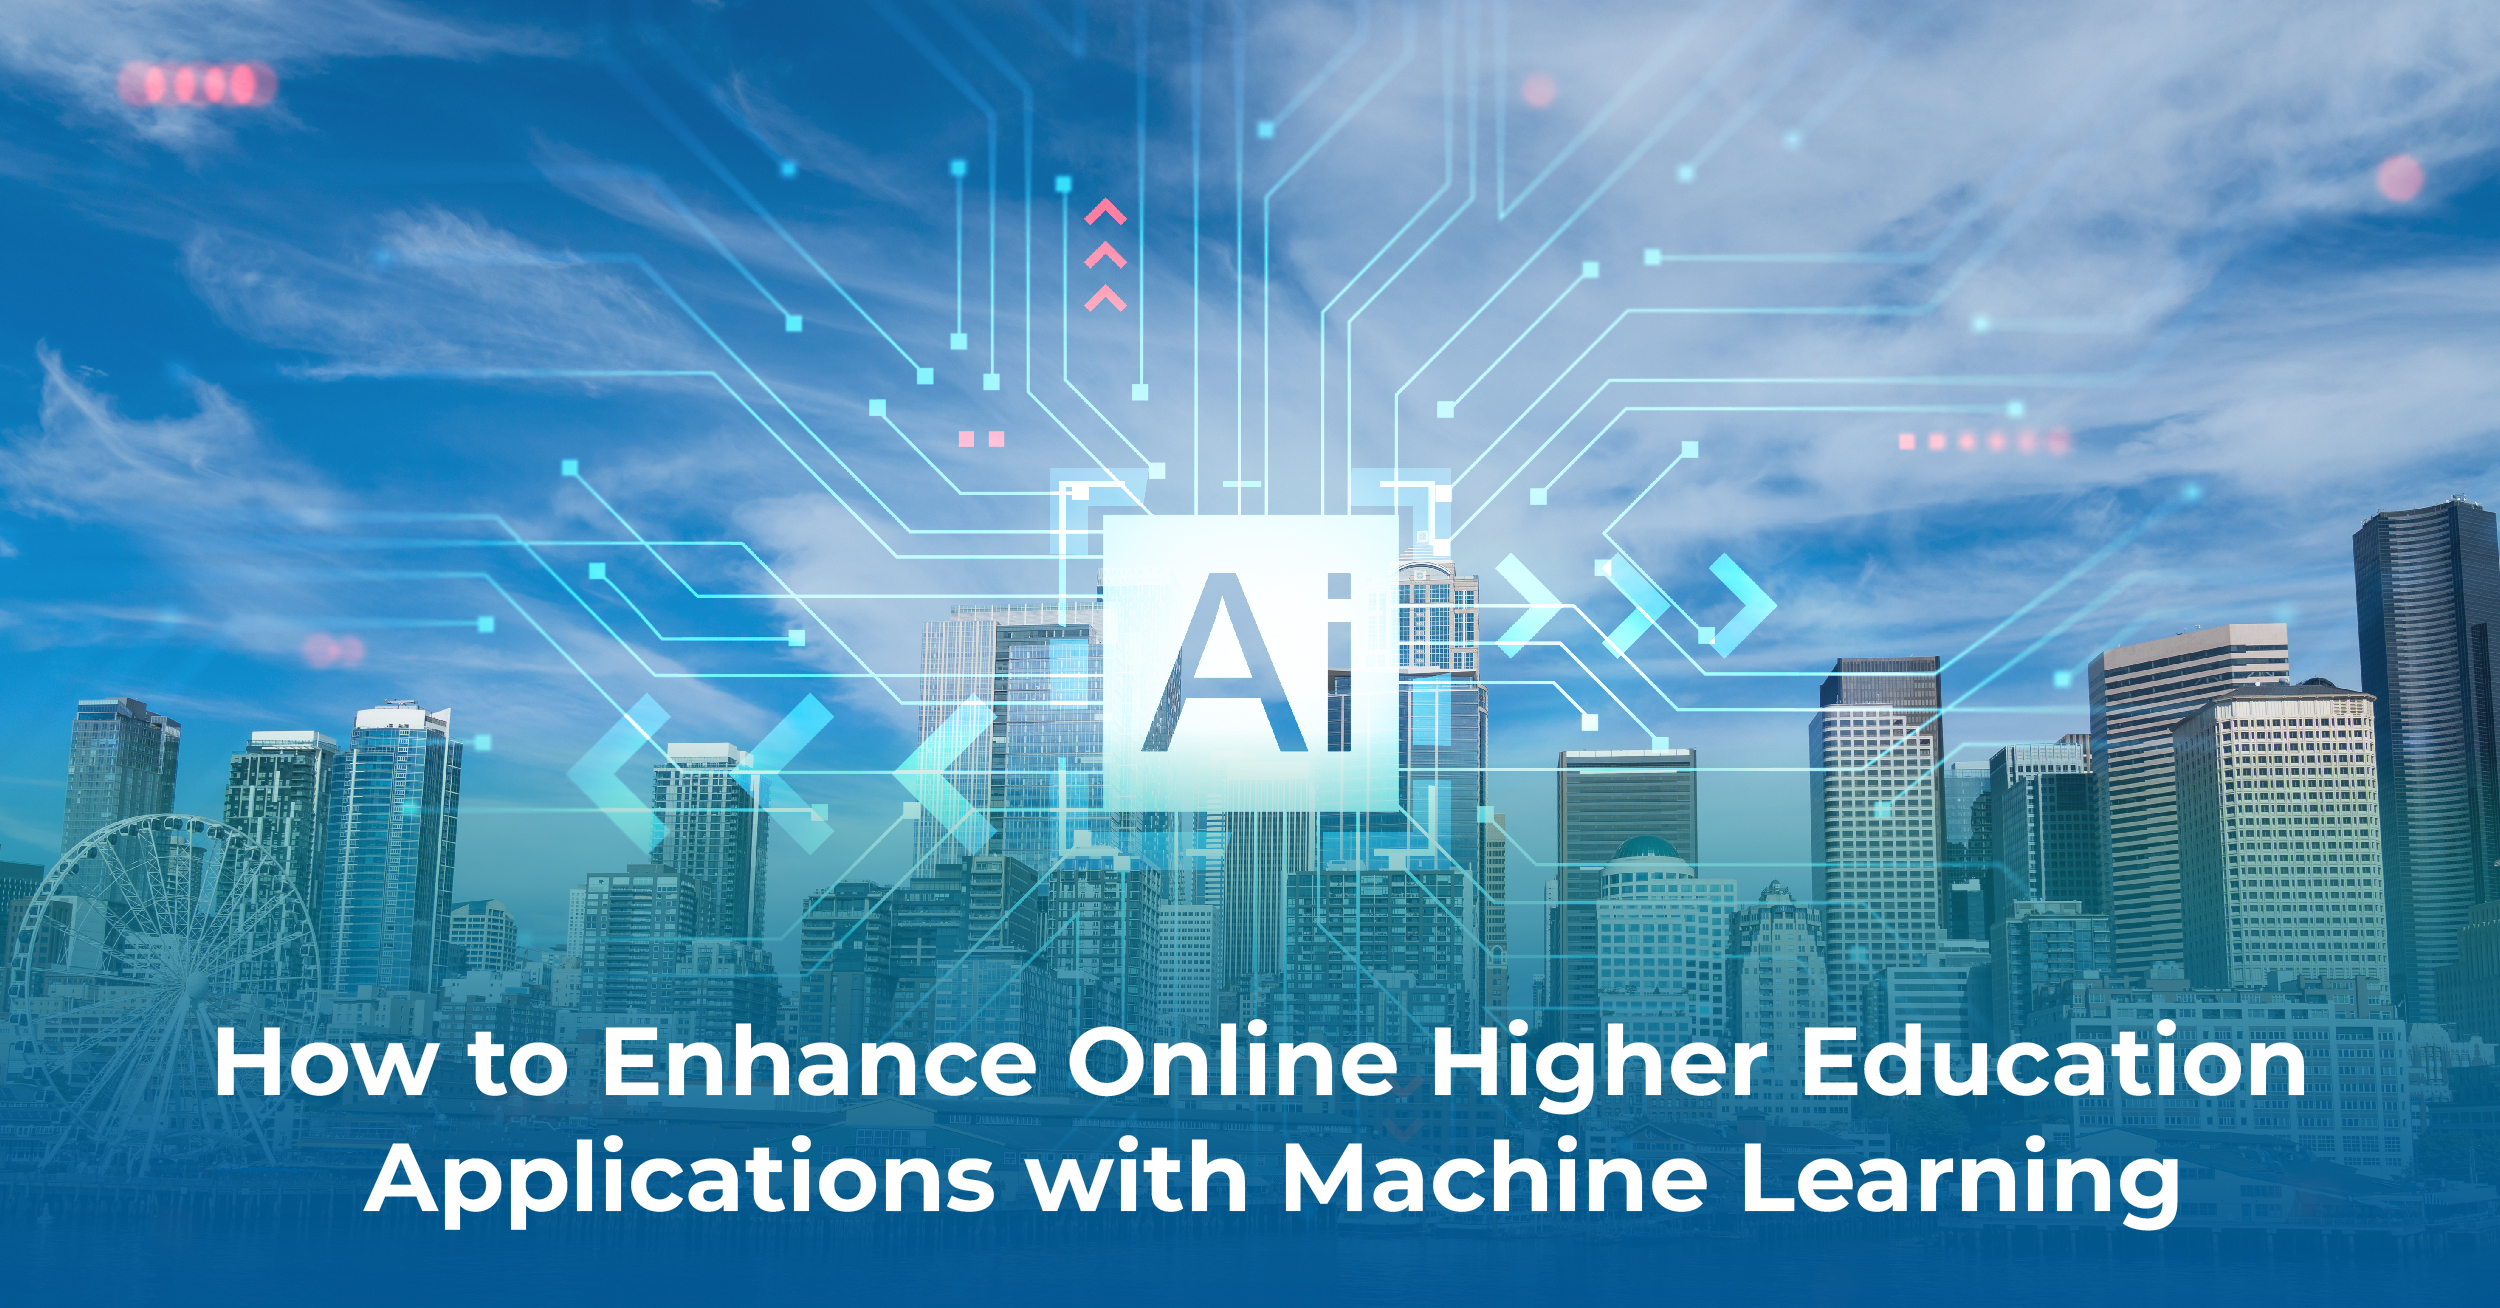 How to Enhance Online Higher Education Applications with Machine Learning